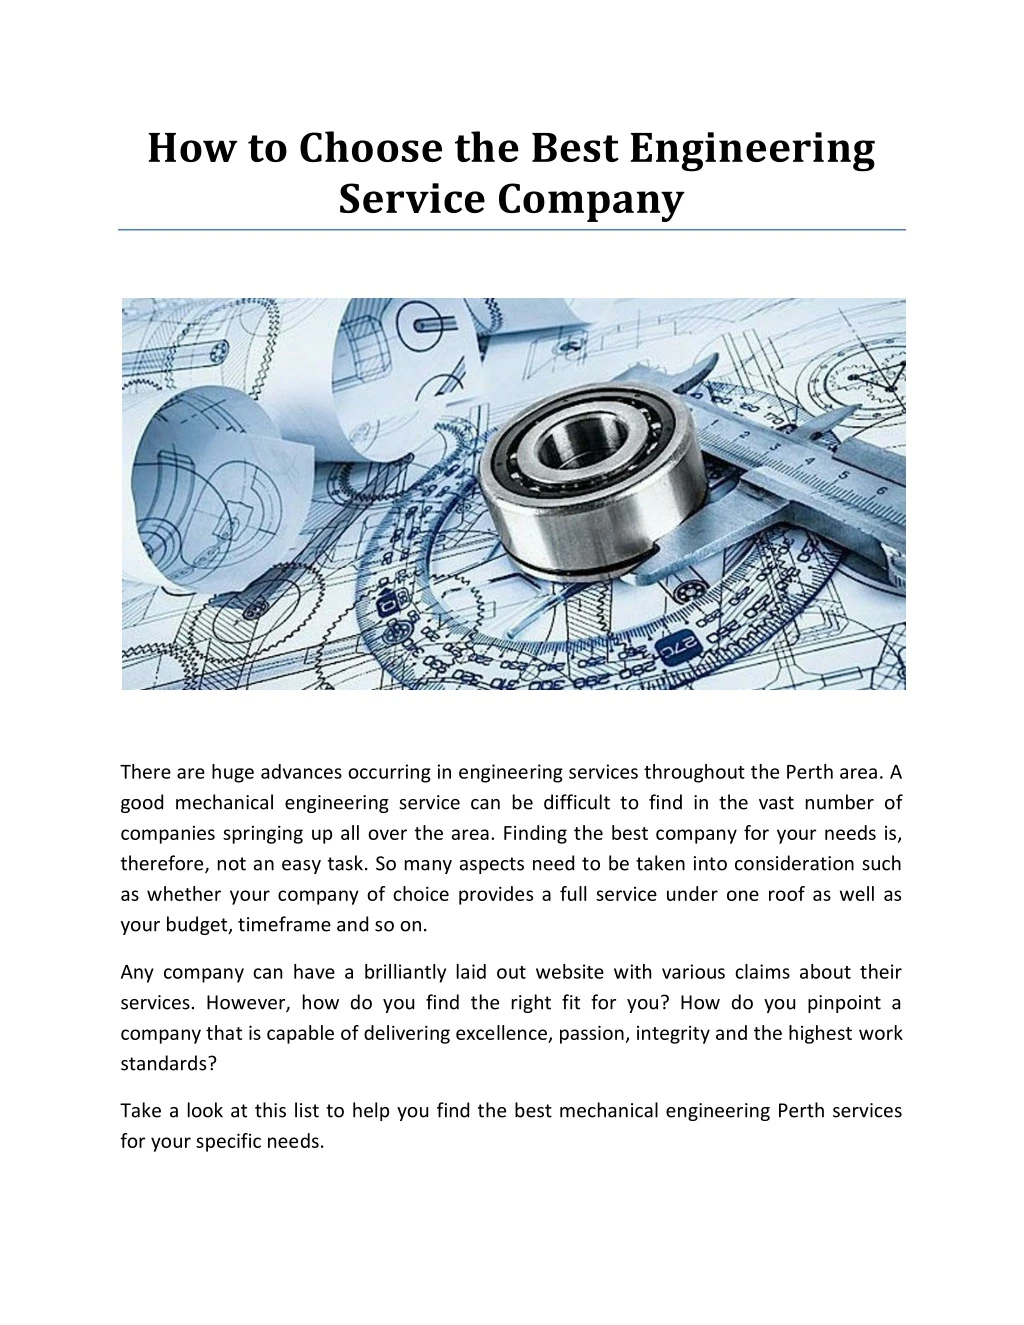 how to choose the best engineering service company